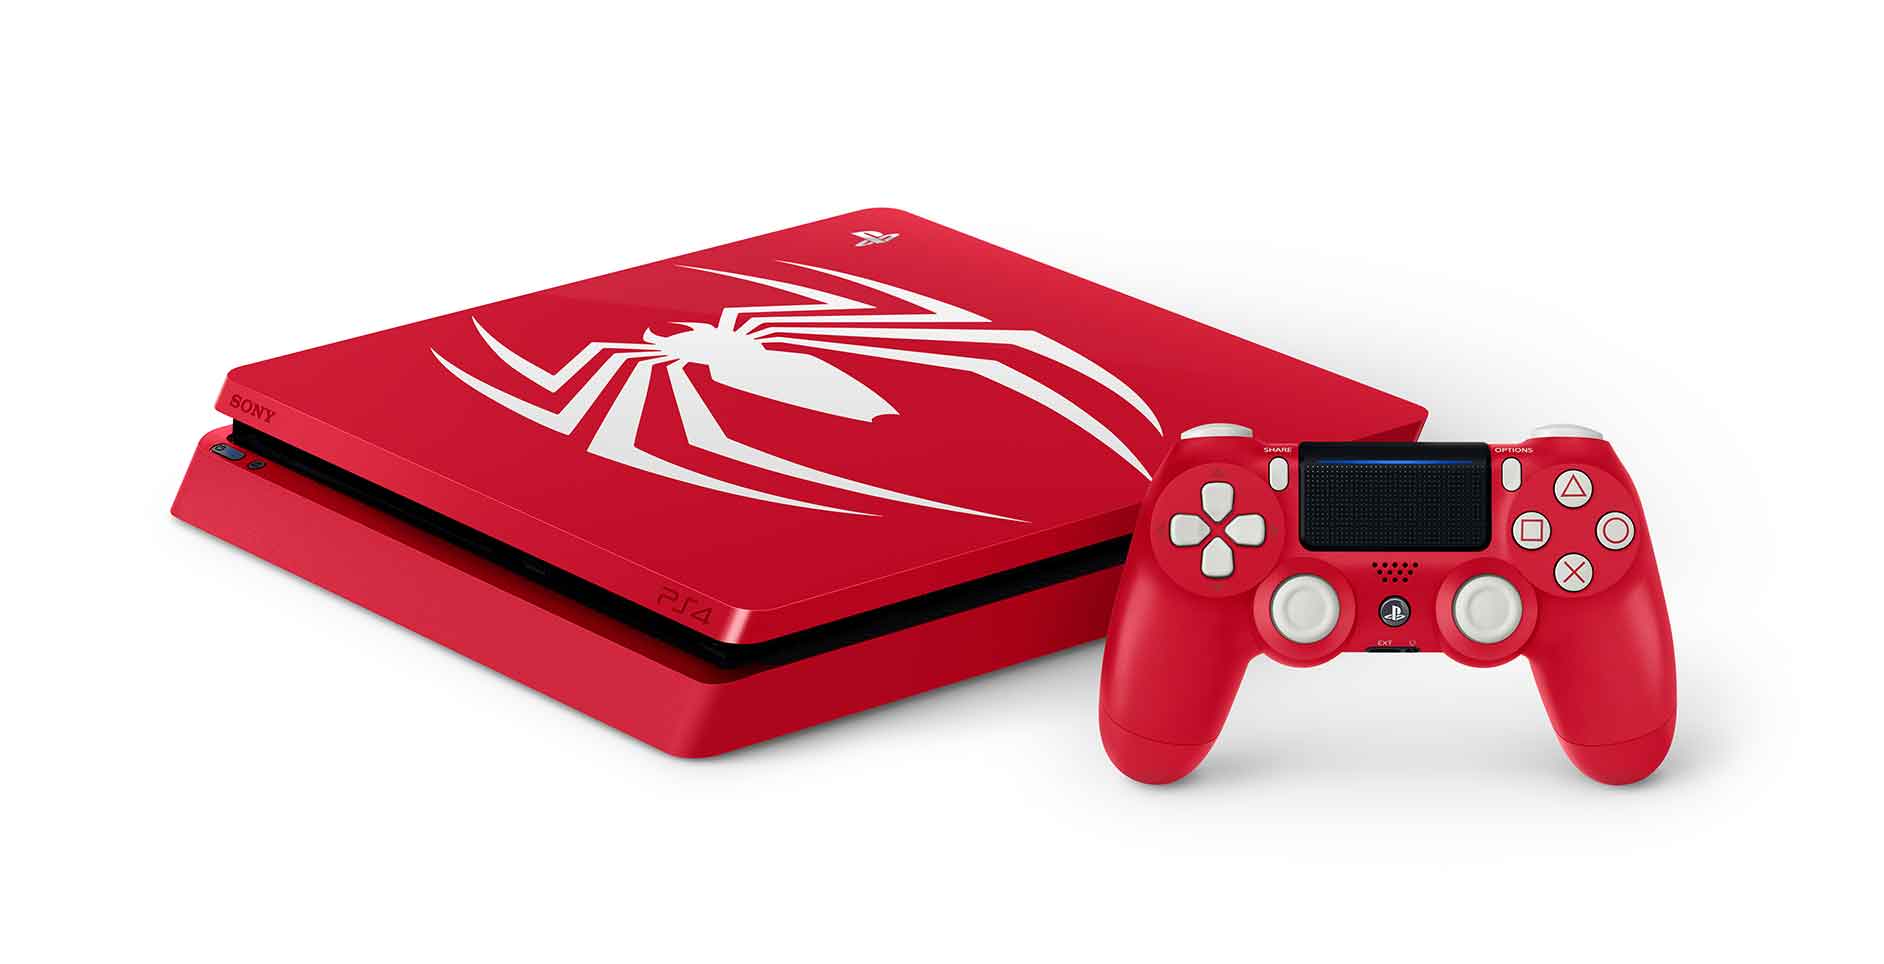 Slikke Sidst Skuespiller A Spider-Man PS4 Pro Is Cool, but What About a Regular Spider-Man PS4